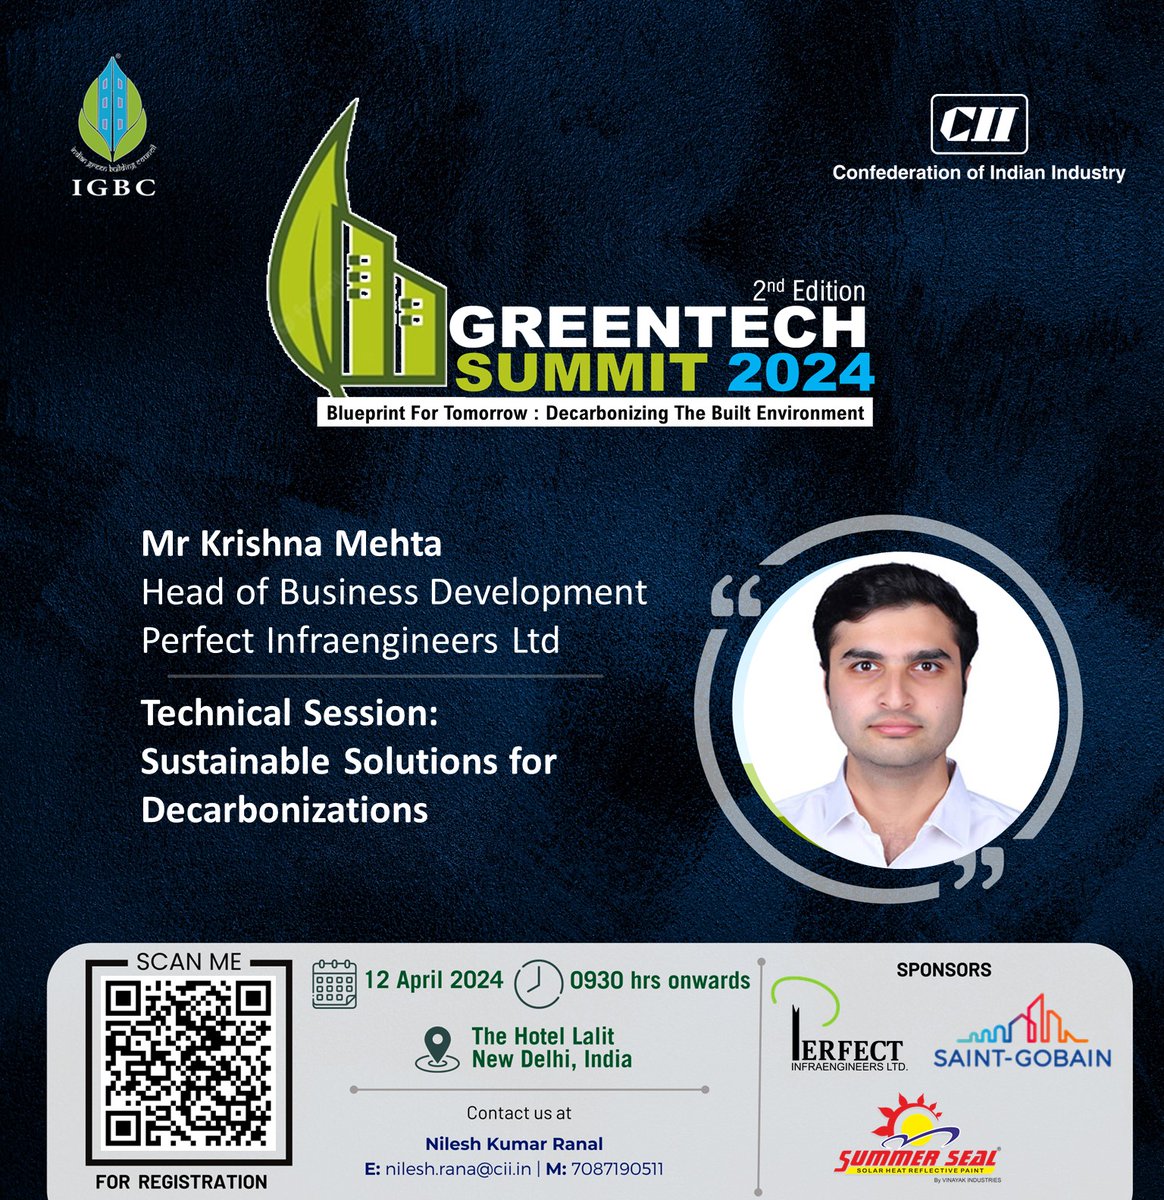 🌿Get ready for 2nd Edition of Greentech Summit 2024 - Blueprint for Tomorrow: Decarbonizing the Built Environment 📅 Date: 12th April 2024 📍 Venue: New Delhi 🕒 Time: 09:30 Register now: cam.mycii.in/OR/OnlineRegis… @FollowCII @saintgobain @Perfect_Infra @WorldGBC #igbc #cii